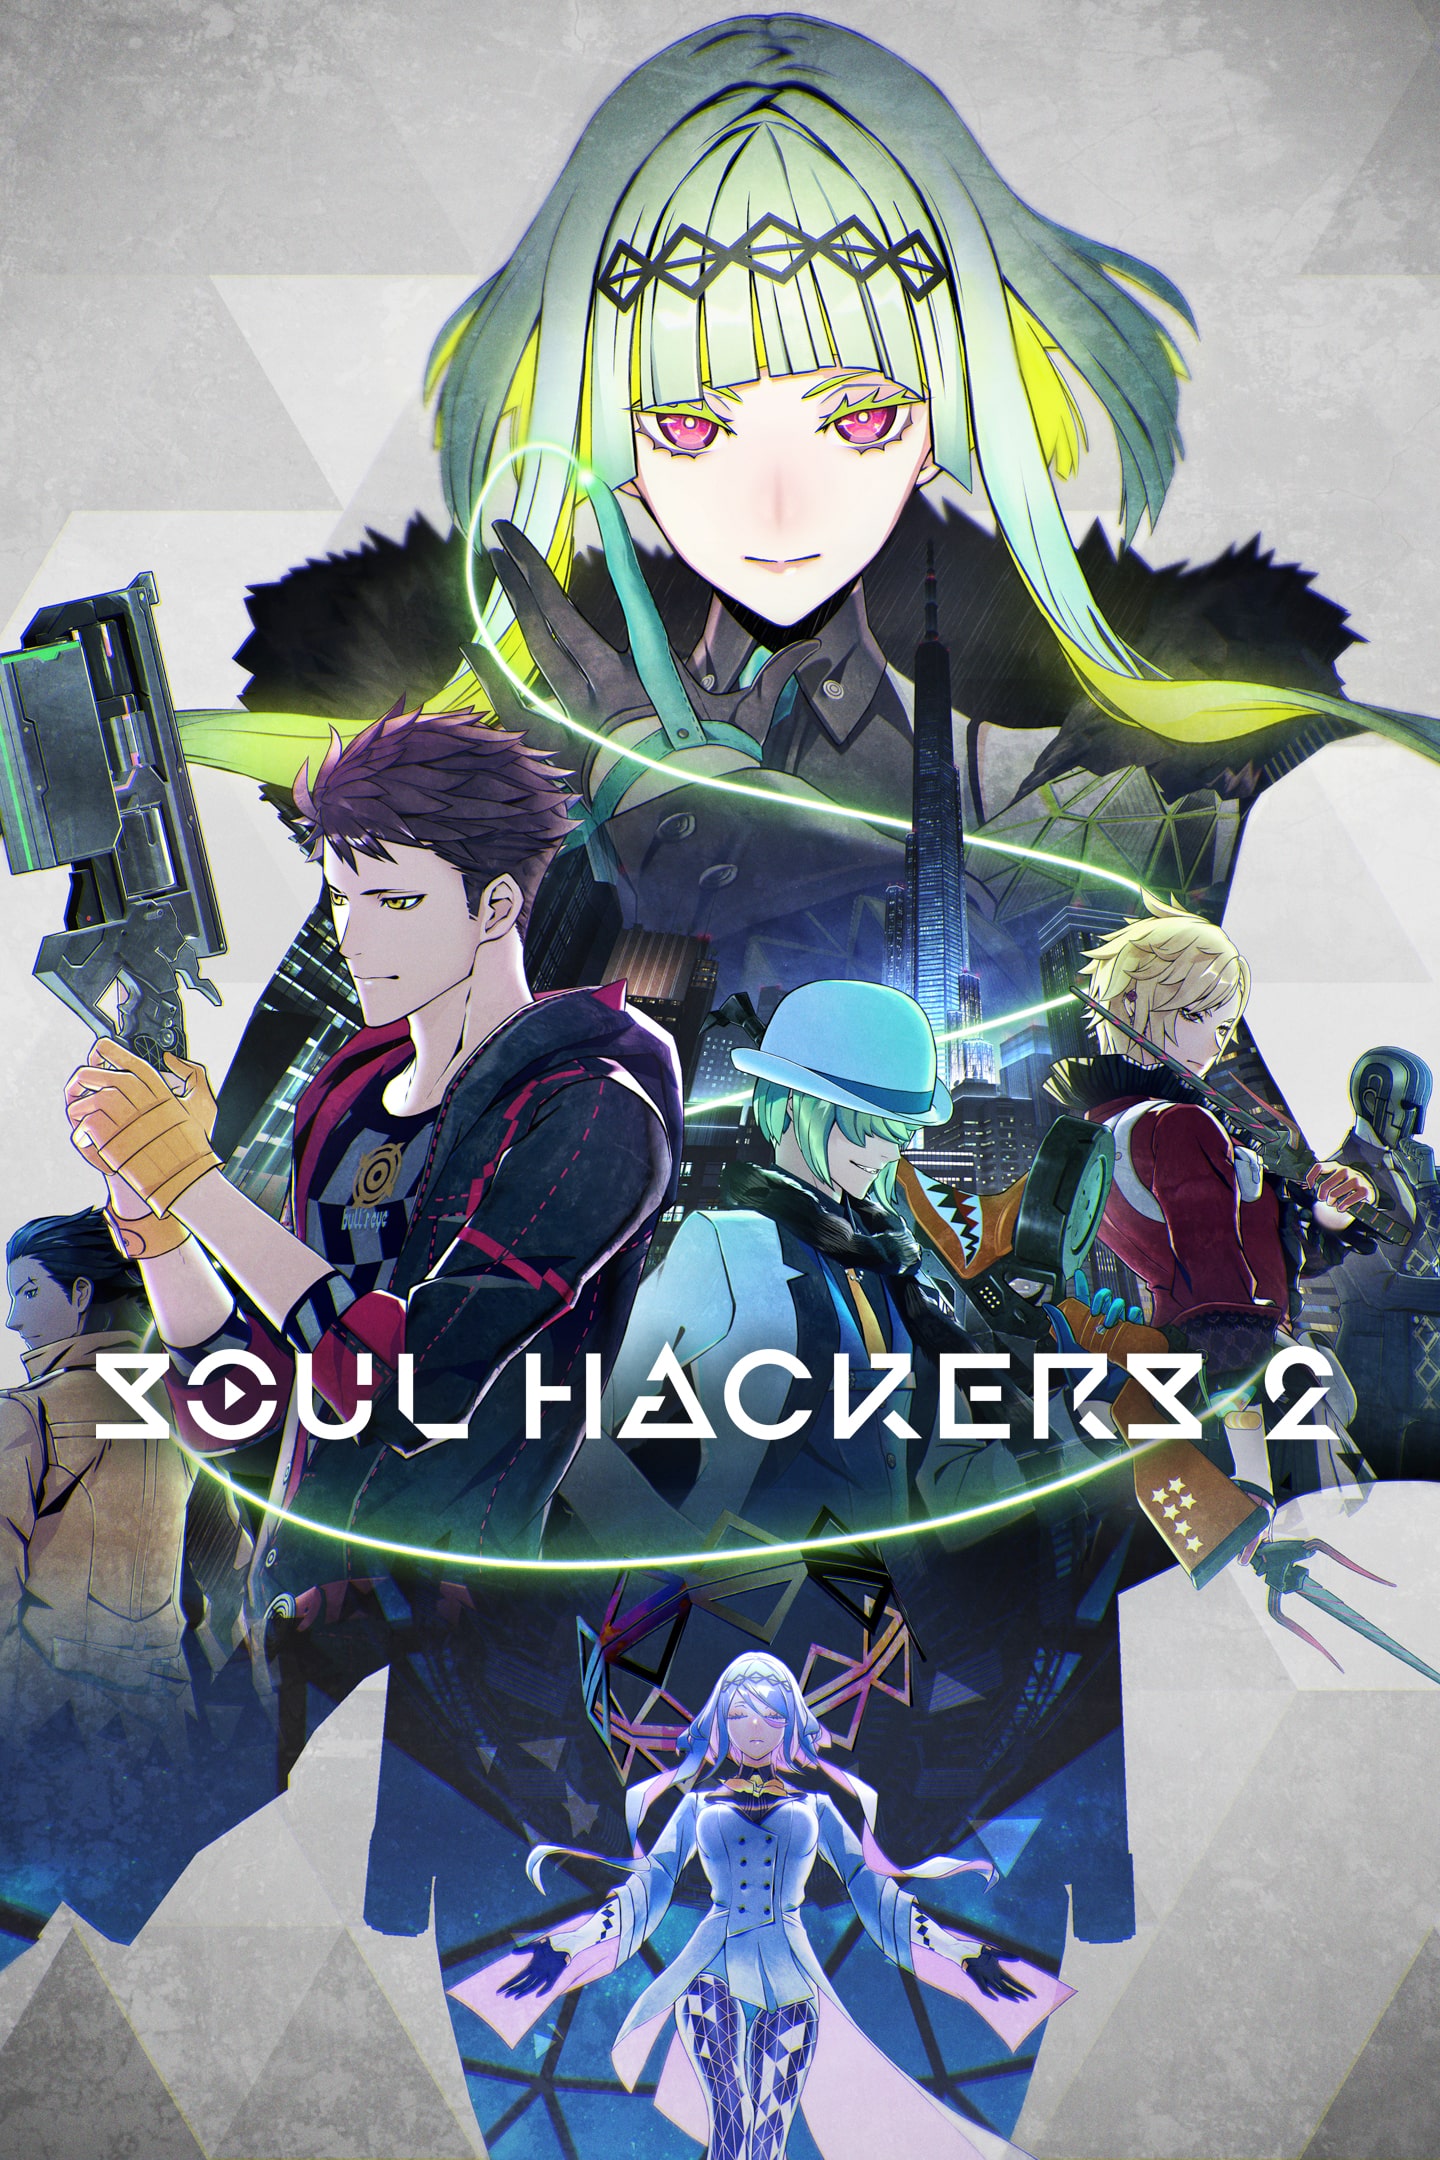 Soul Hackers 2 - Costume & BGM Pack no Steam